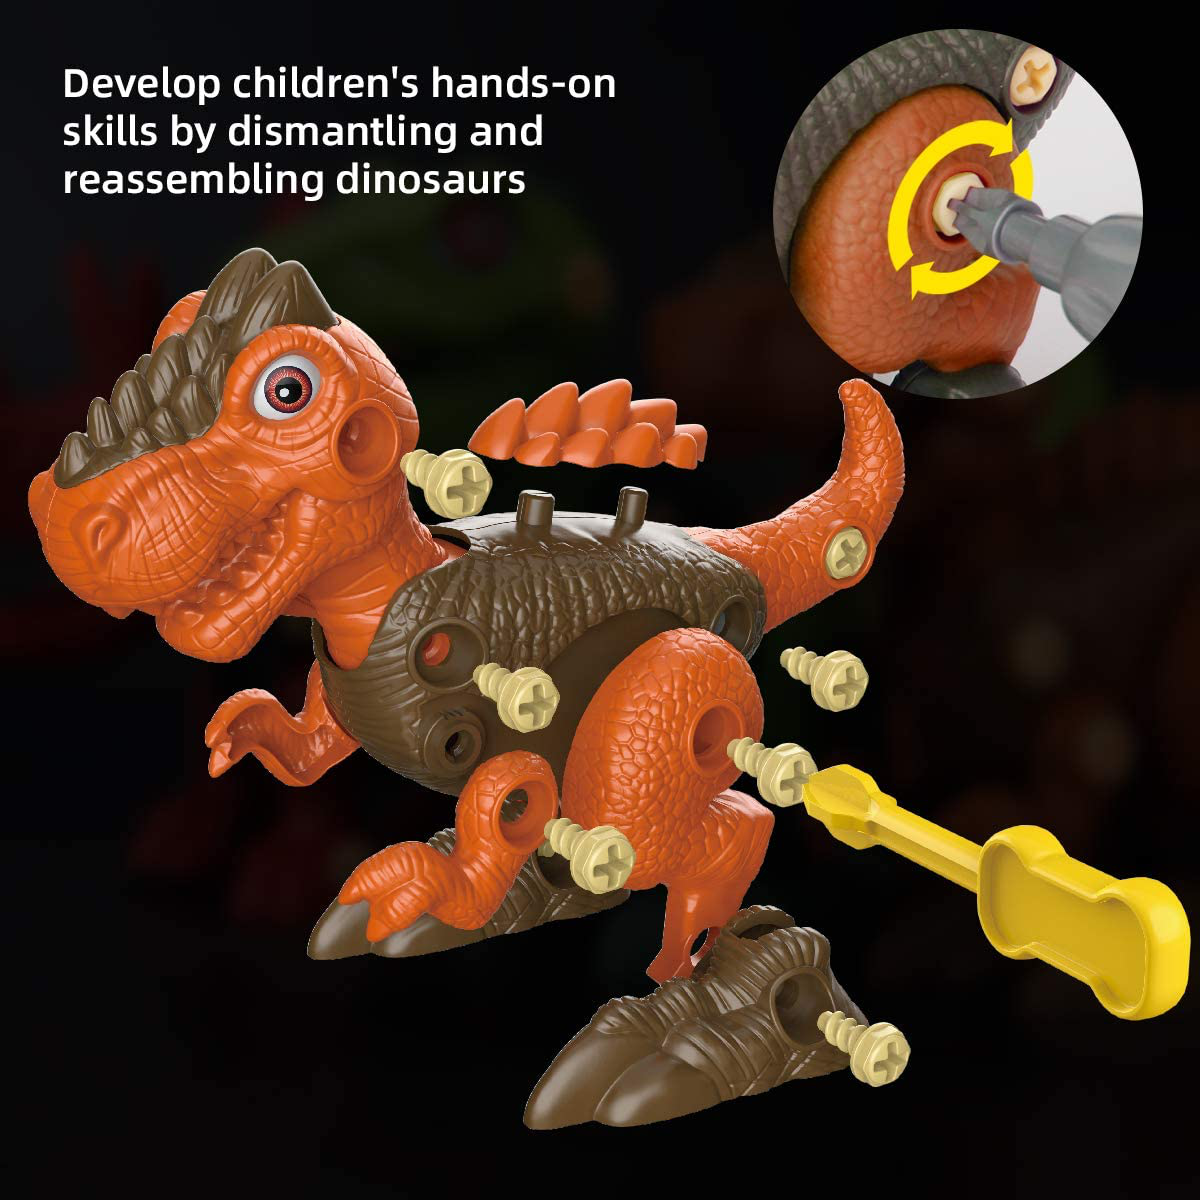 BOBXIN Take Apart Dinosaur Toys for Kids 3-5 ,DIY T Rex Building Toy Set with Electric Drill,Construction Engineering Play Kit, STEM Learning Gift for Boy Girl Age 3 4 5 6 7 Years Old